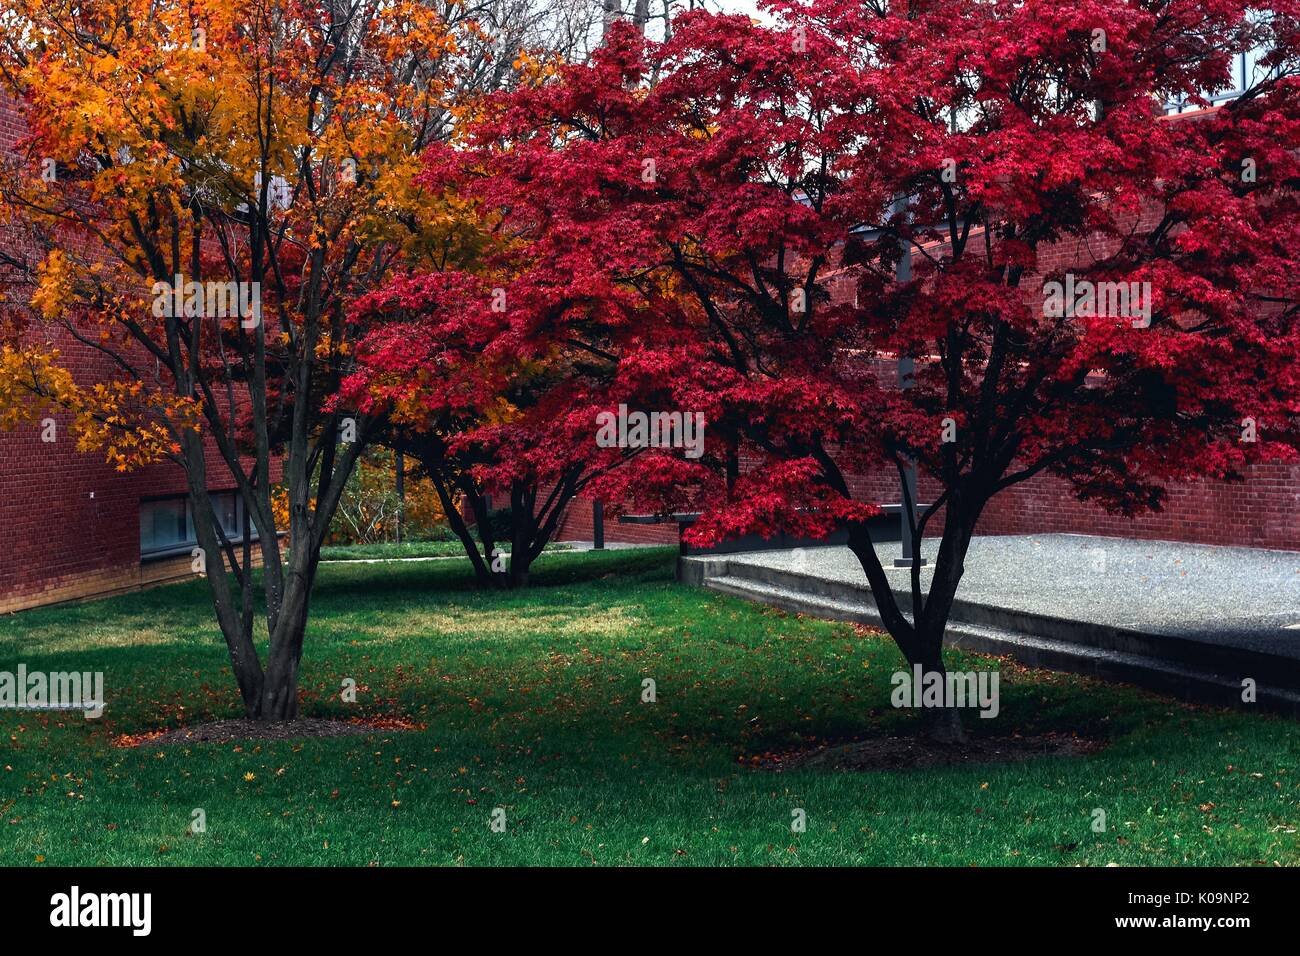 Trees with autumnal leaves in red and orange sit in front of the Mattin Center, Johns Hopkins University's undergraduate center for the arts on the Homewood campus in Baltimore, Maryland, 2016. Courtesy Eric Chen. Stock Photo